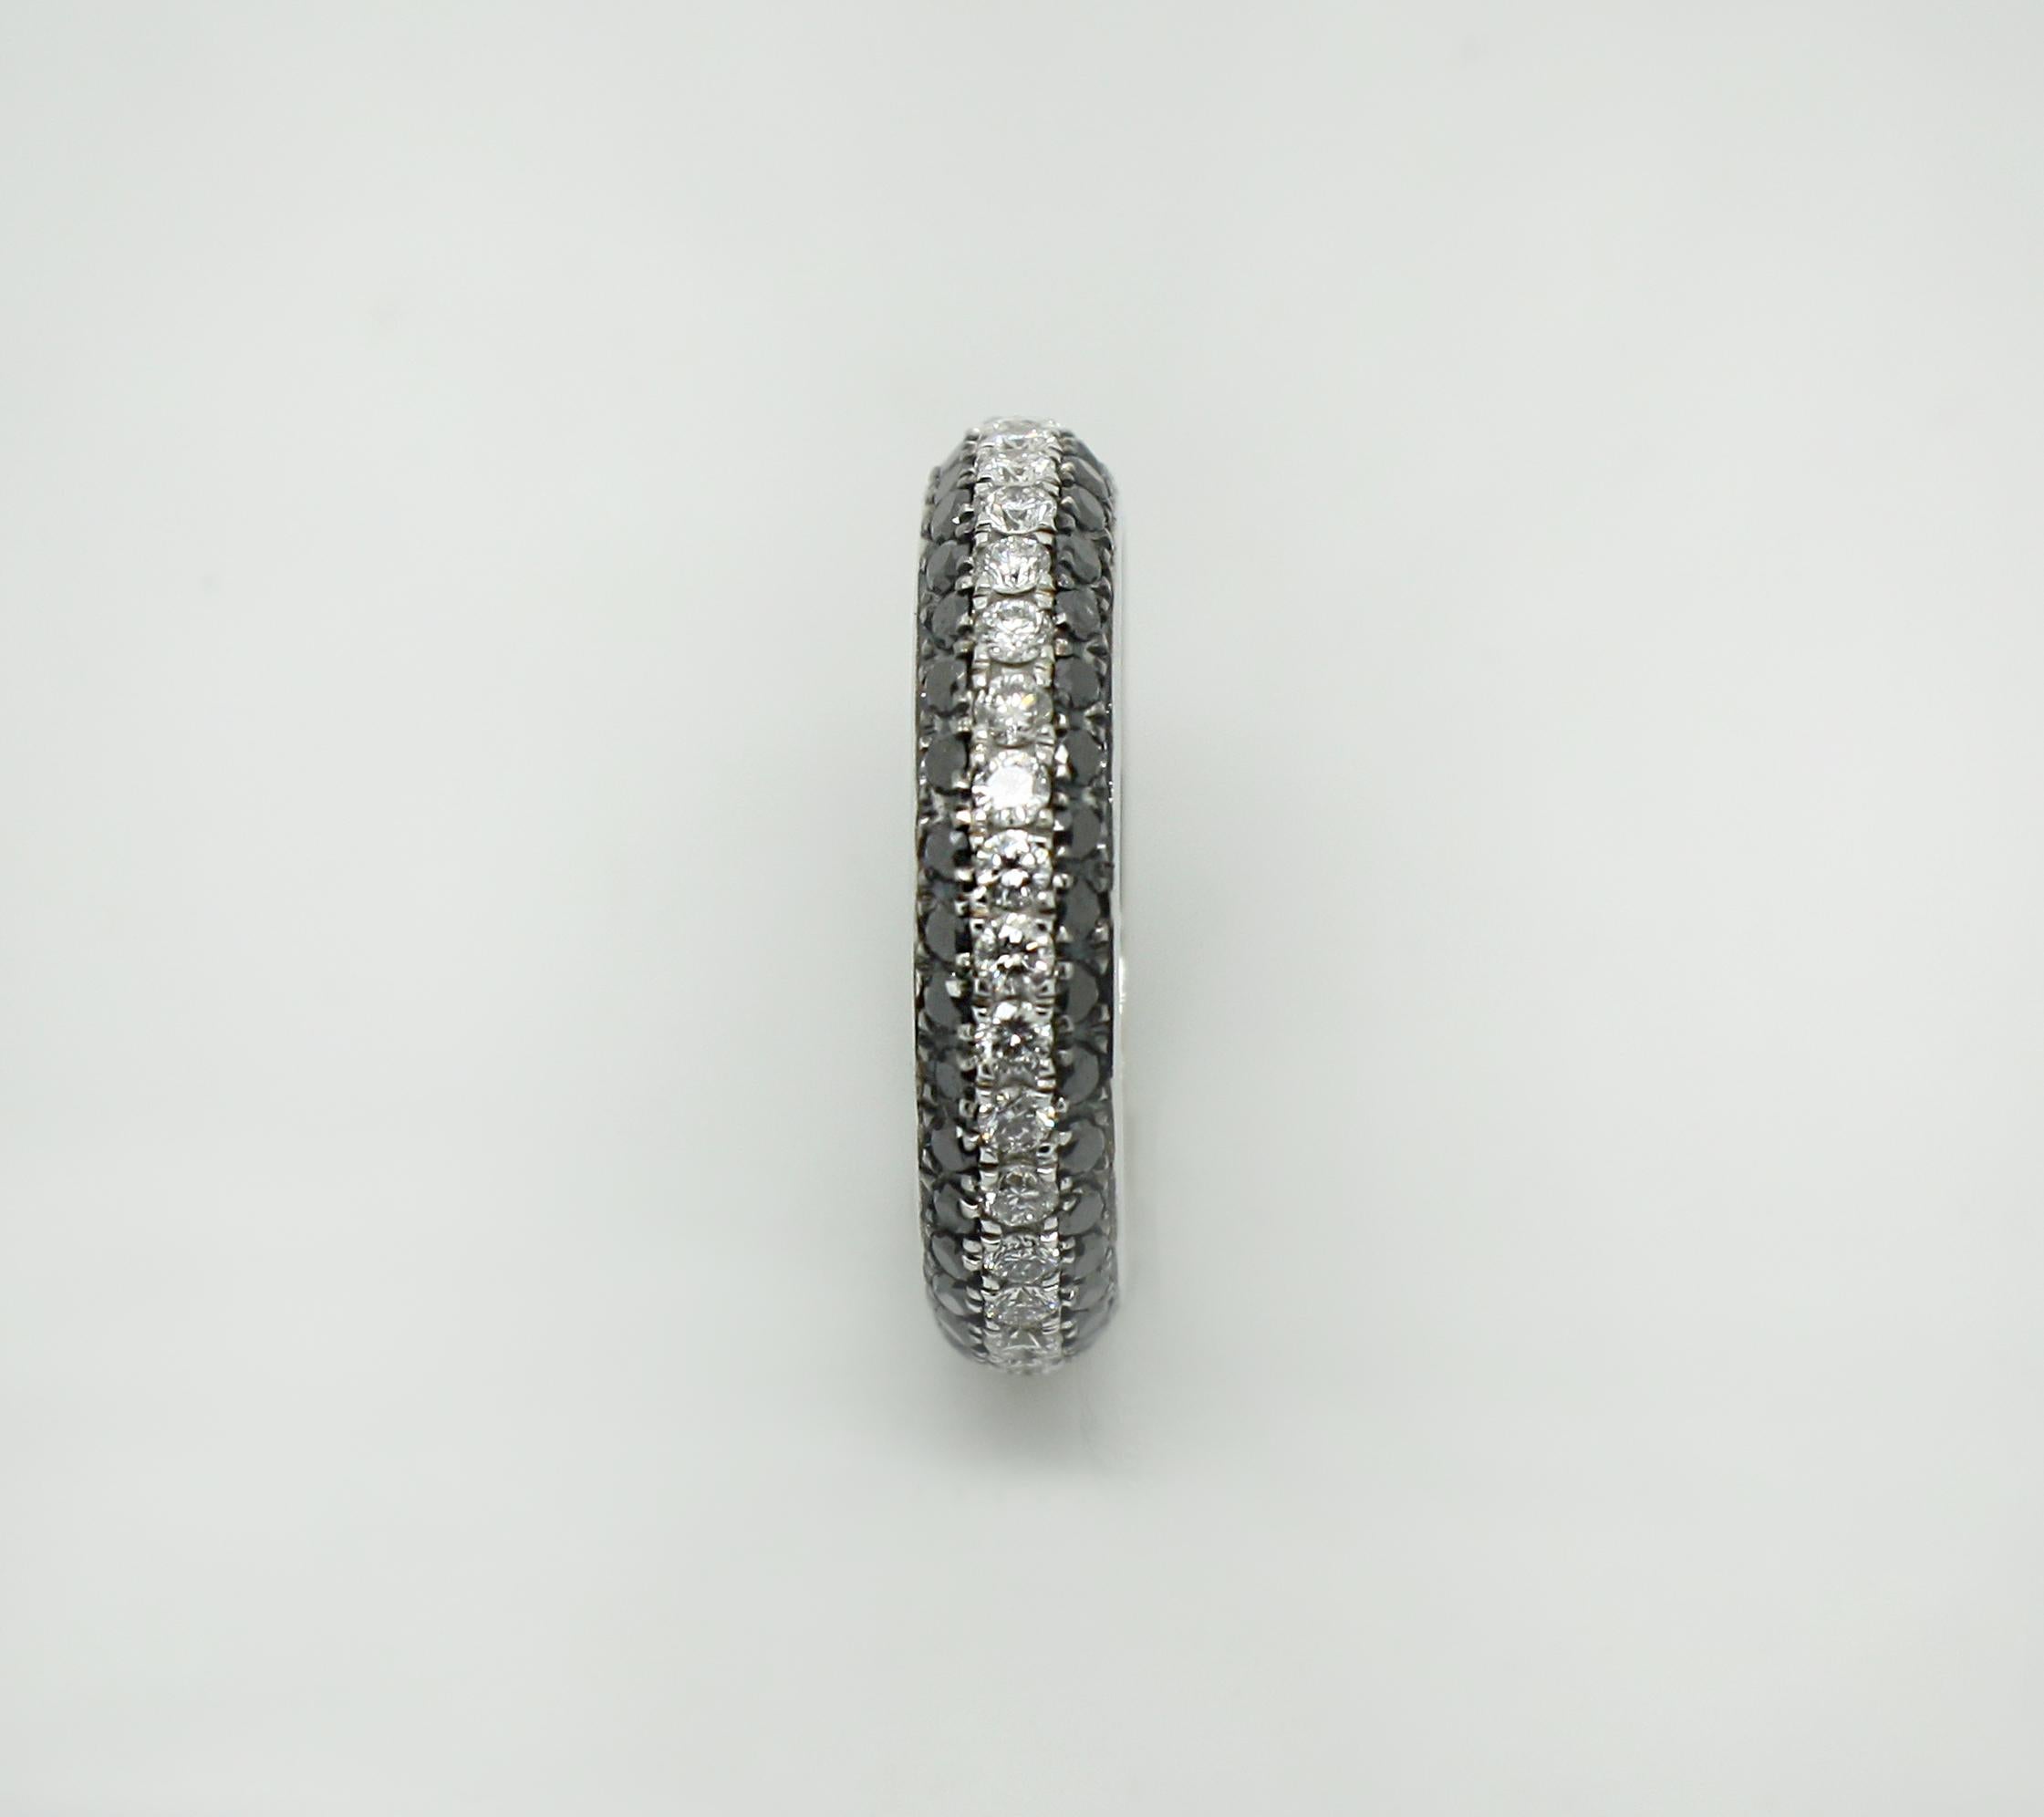 S.Georgios designer 18 Karat White Gold Thin Band Ring is all handmade in a unique two-tone look. The gorgeous band features brilliant cut white diamonds total weight of 0.78 Carat, and black diamonds total weight of 1.10 Carat which are set in